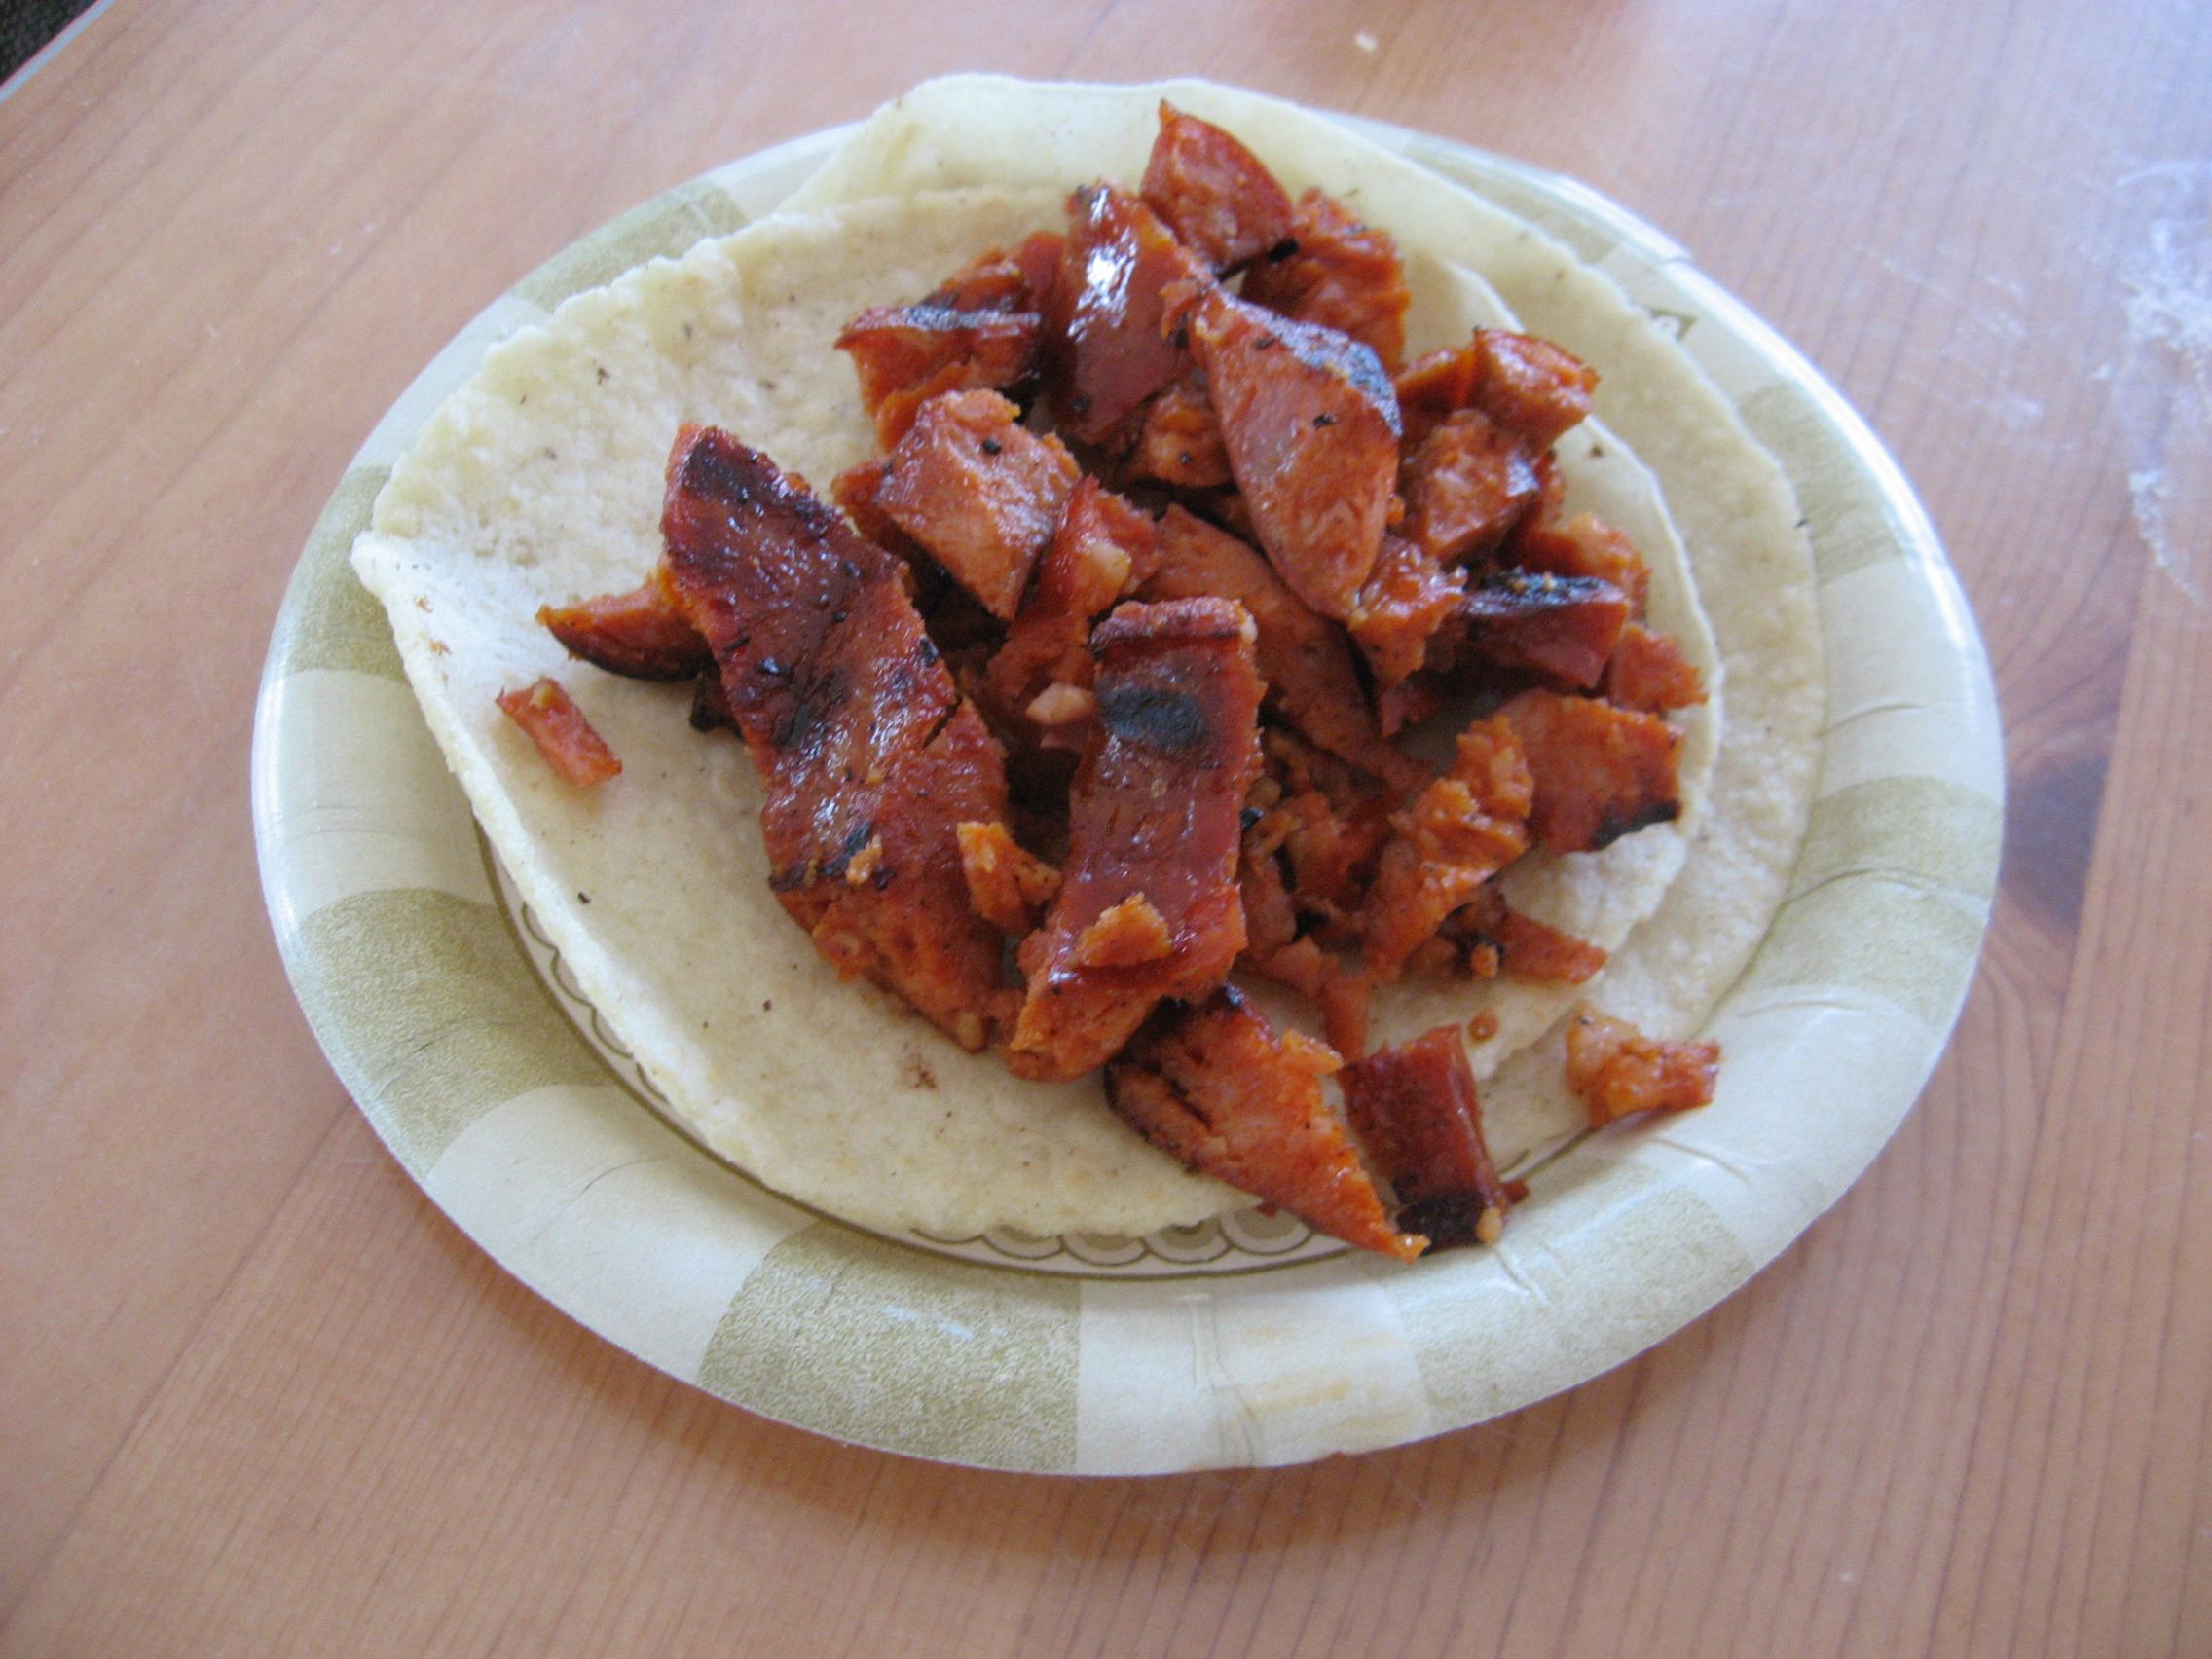 Spice-red chorizo sausage spread out on tortillas on a paper plate